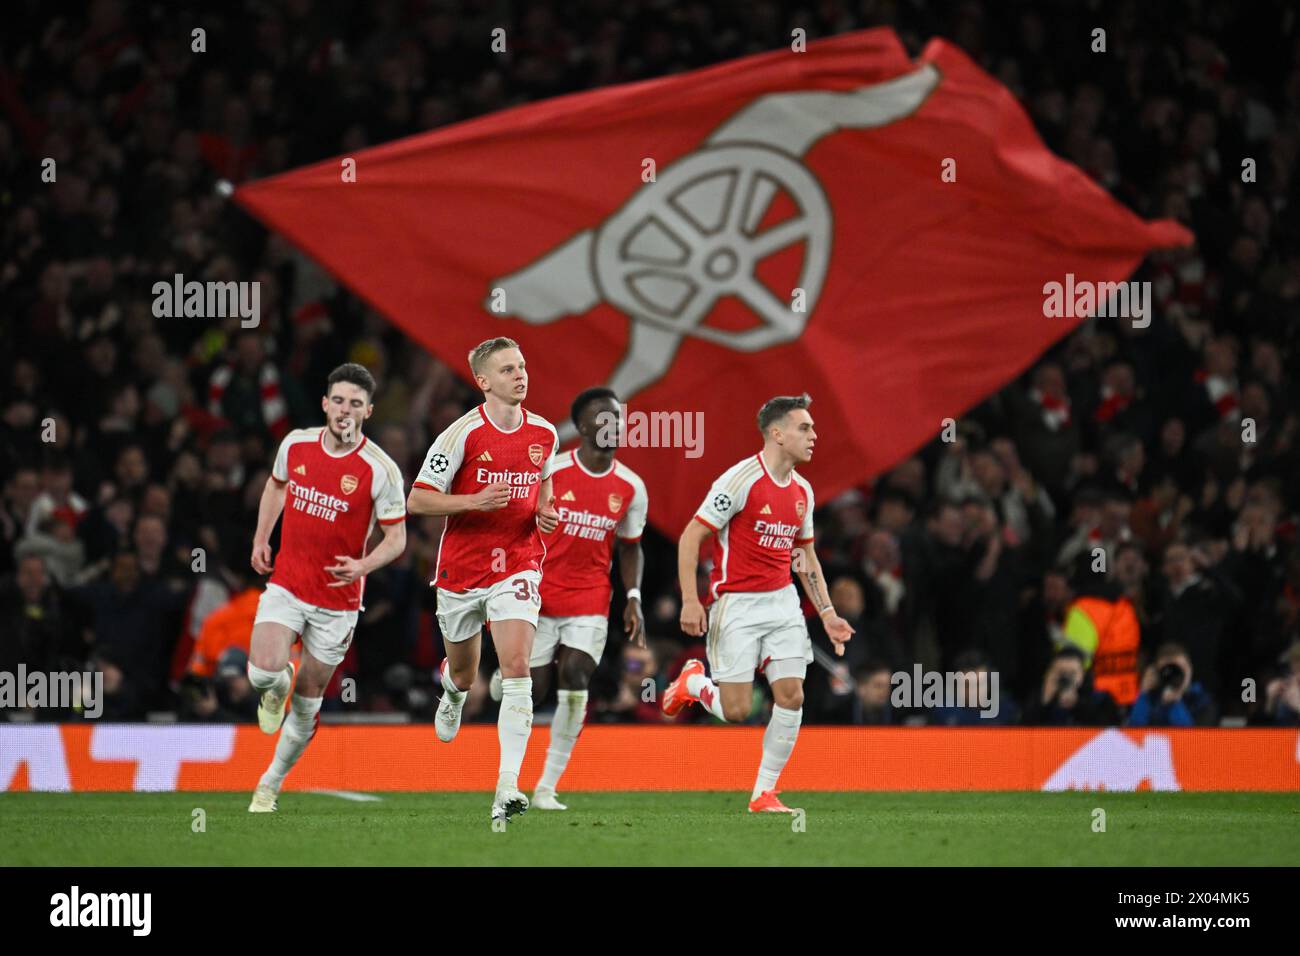 Oleksandr Zinchenko of Arsenal celebrates his teammate Leandro Trossard's goal during the UEFA Champions League Quarter-Final (1st leg) football match between Arsenal FC and Bayern Munich at the Emirates Stadium in London, England. (Will Palmer/SPP/ATP Images) Credit: SPP Sport Press Photo. /Alamy Live News Stock Photo